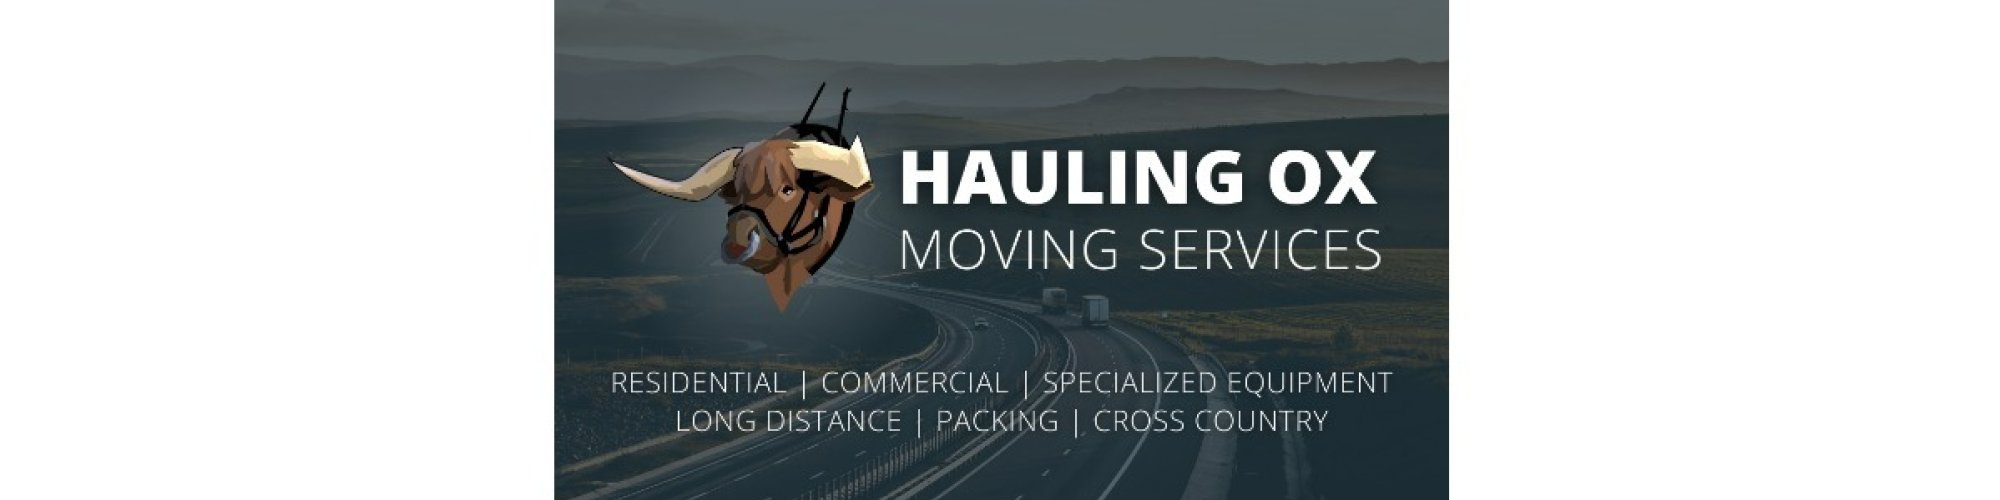 Hauling Ox Moving